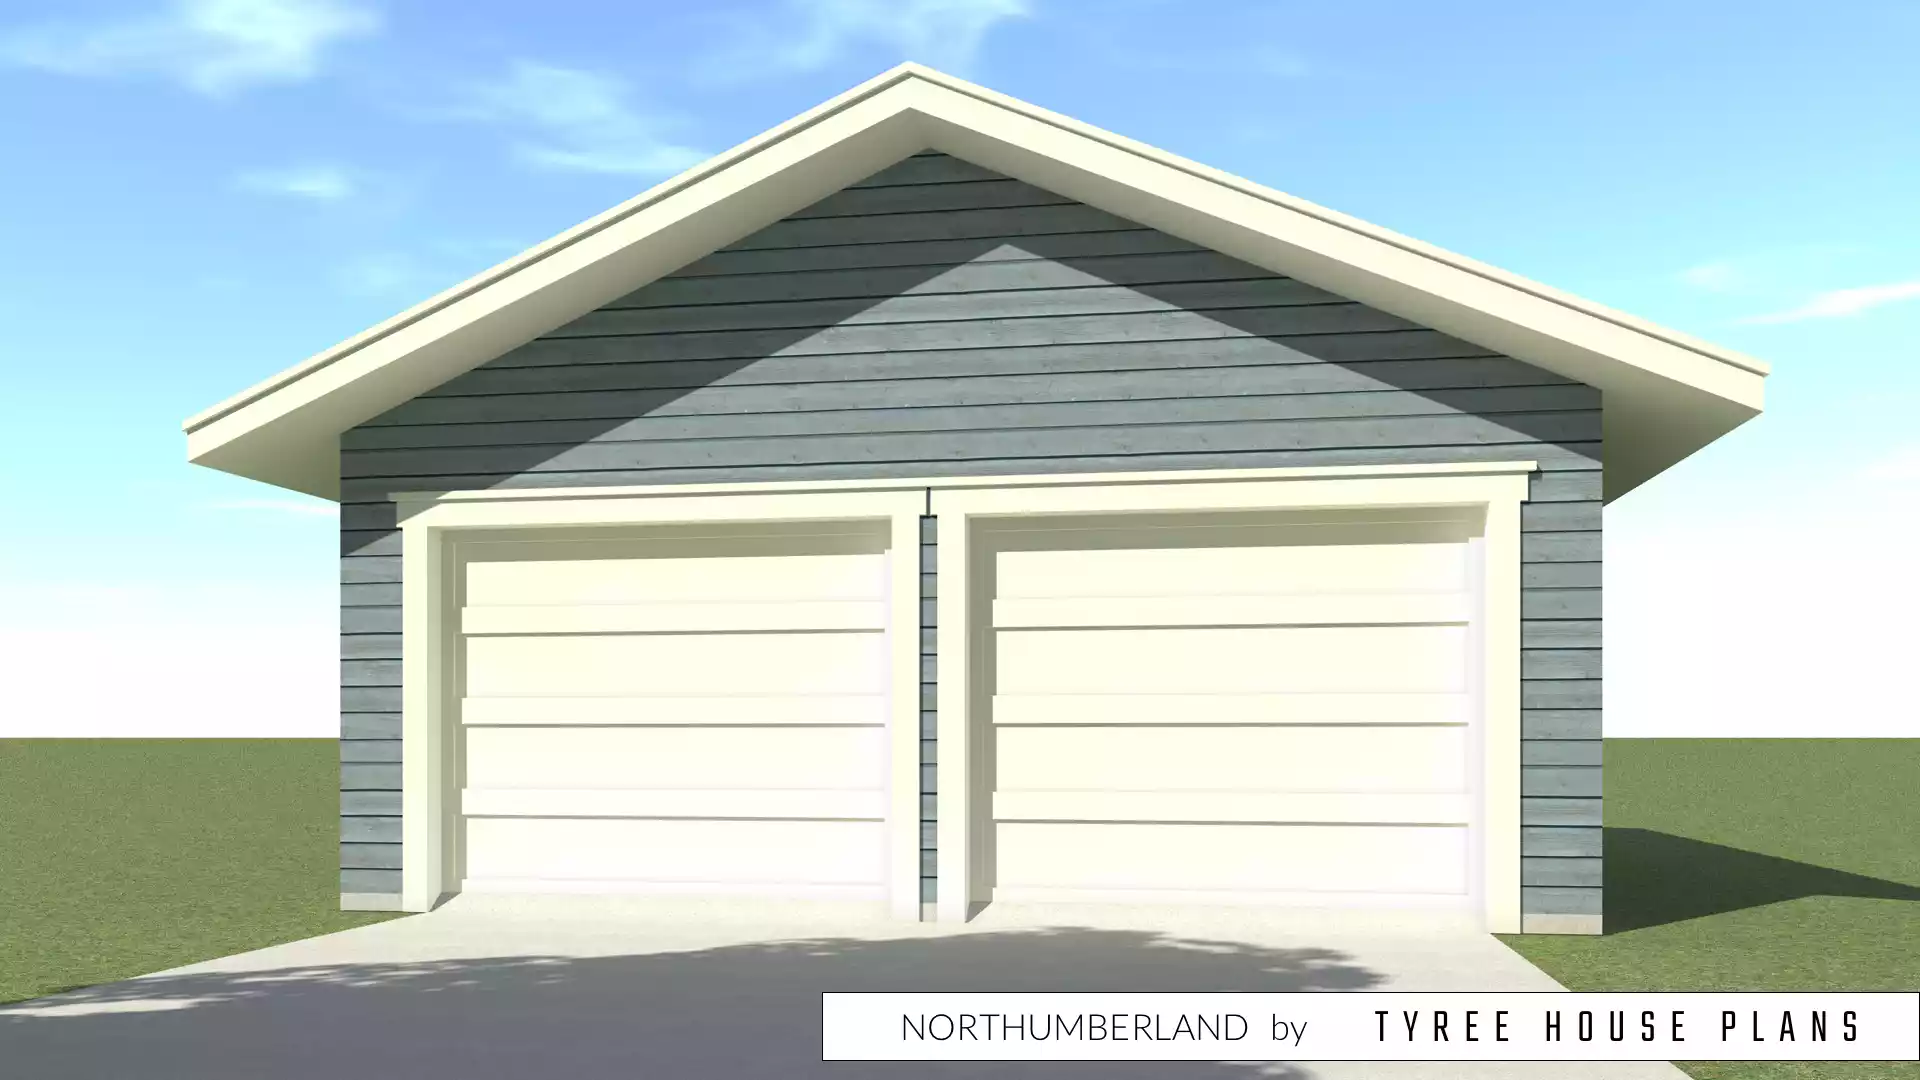 Detached garage. Northumberland by Tyree House Plans.